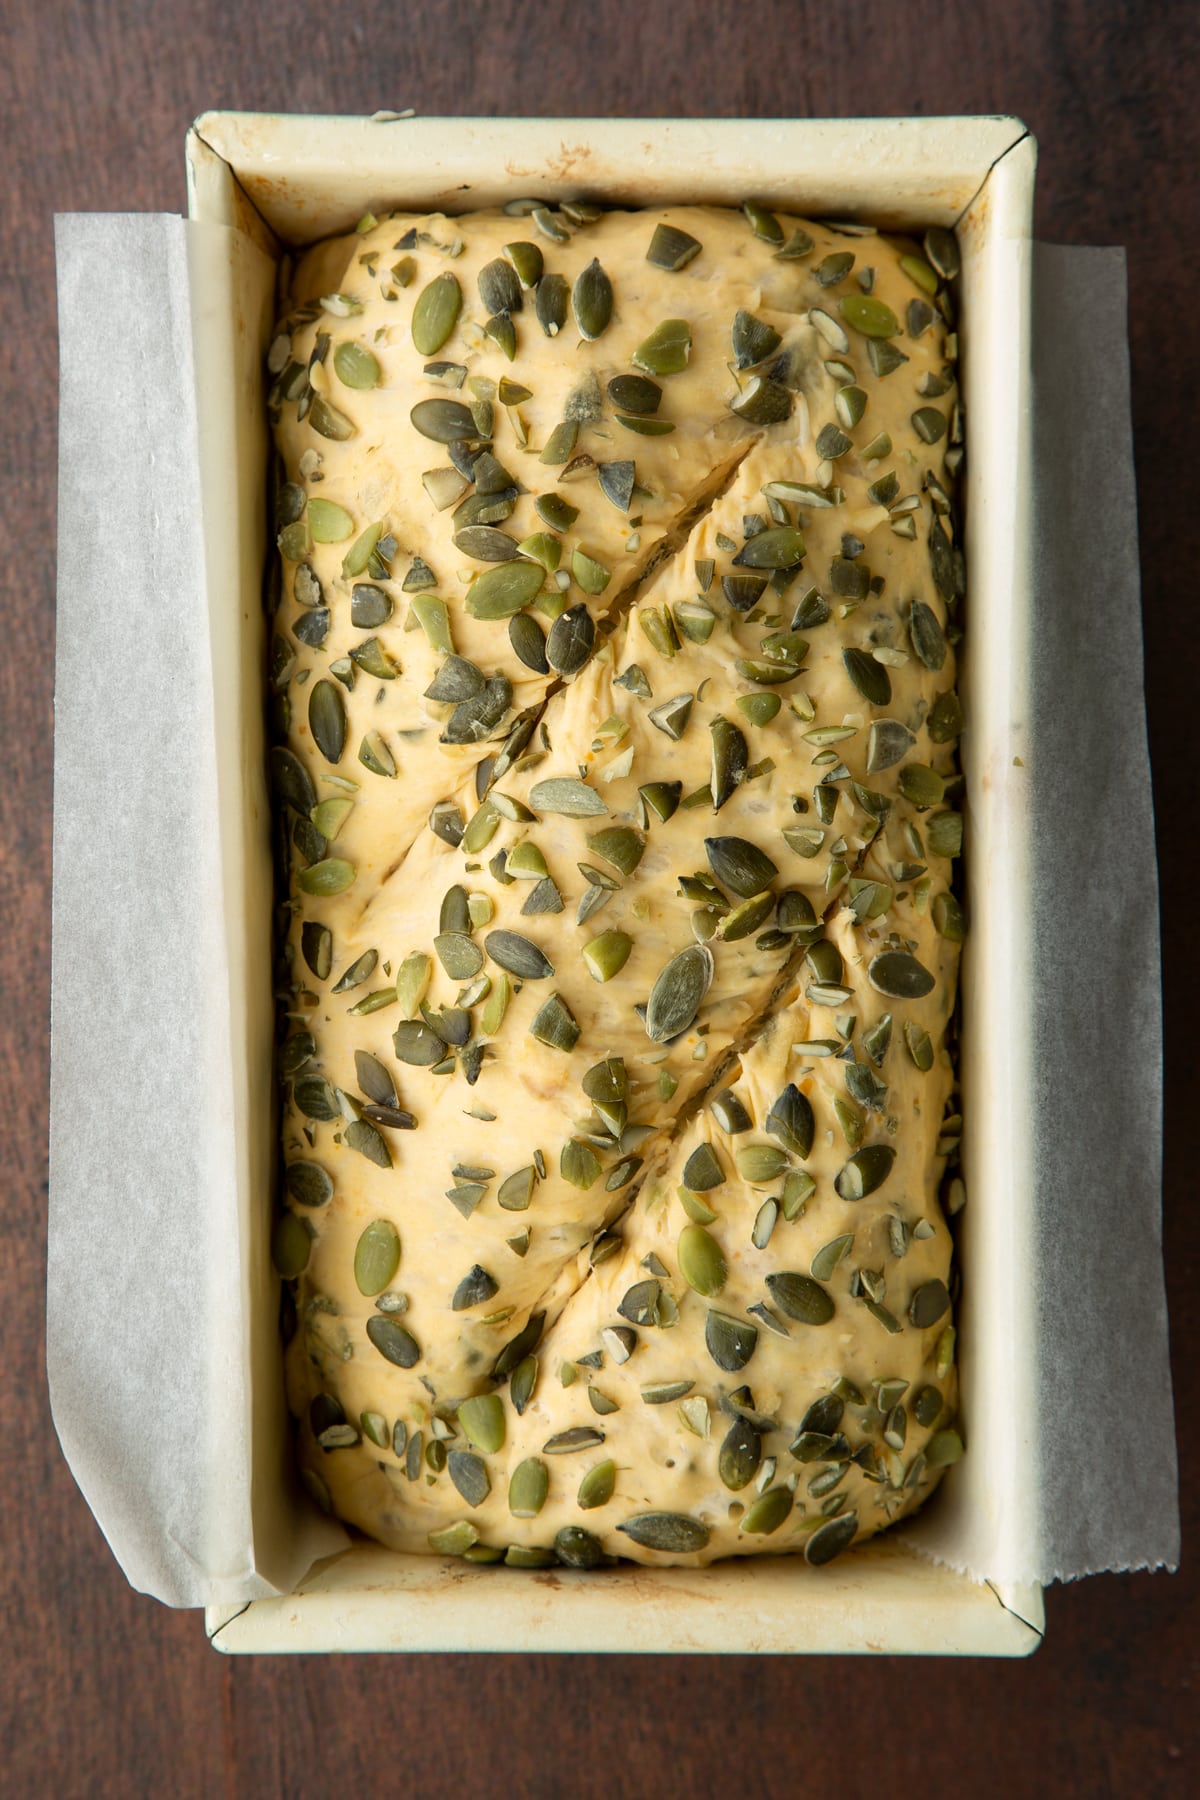 Proved pumpkin seed bread dough covered with pumpkin seeds in a loaf tin lined with baking paper. The top has been slashed twice.